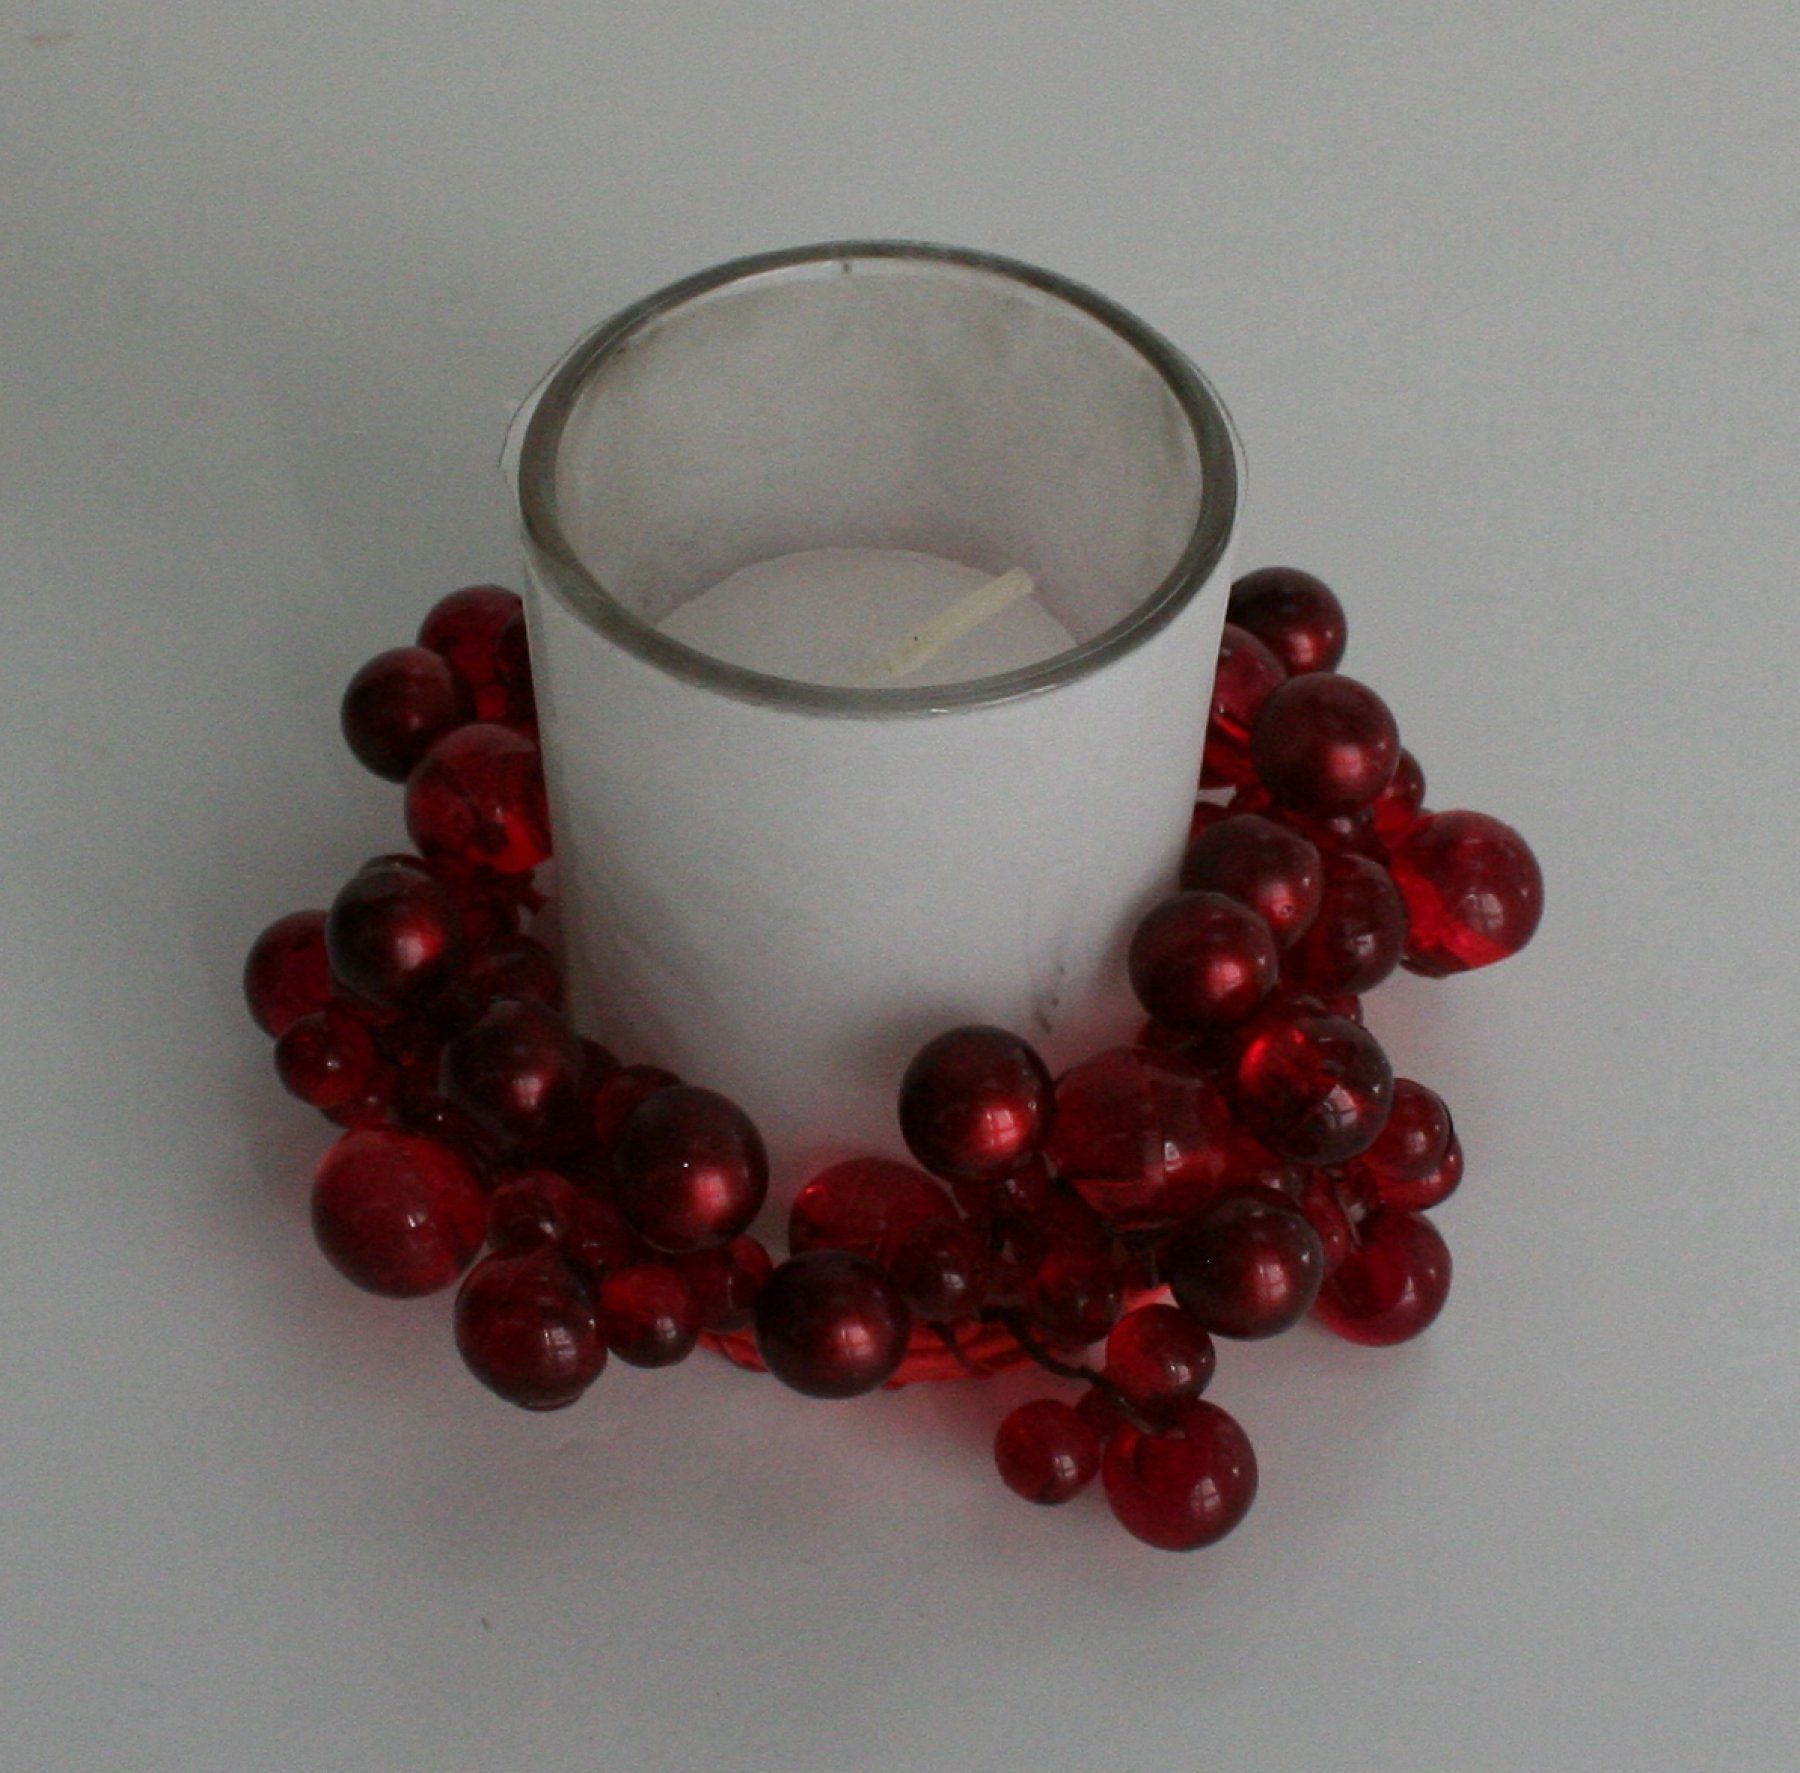 12 christmas candle holder rings cranberry red